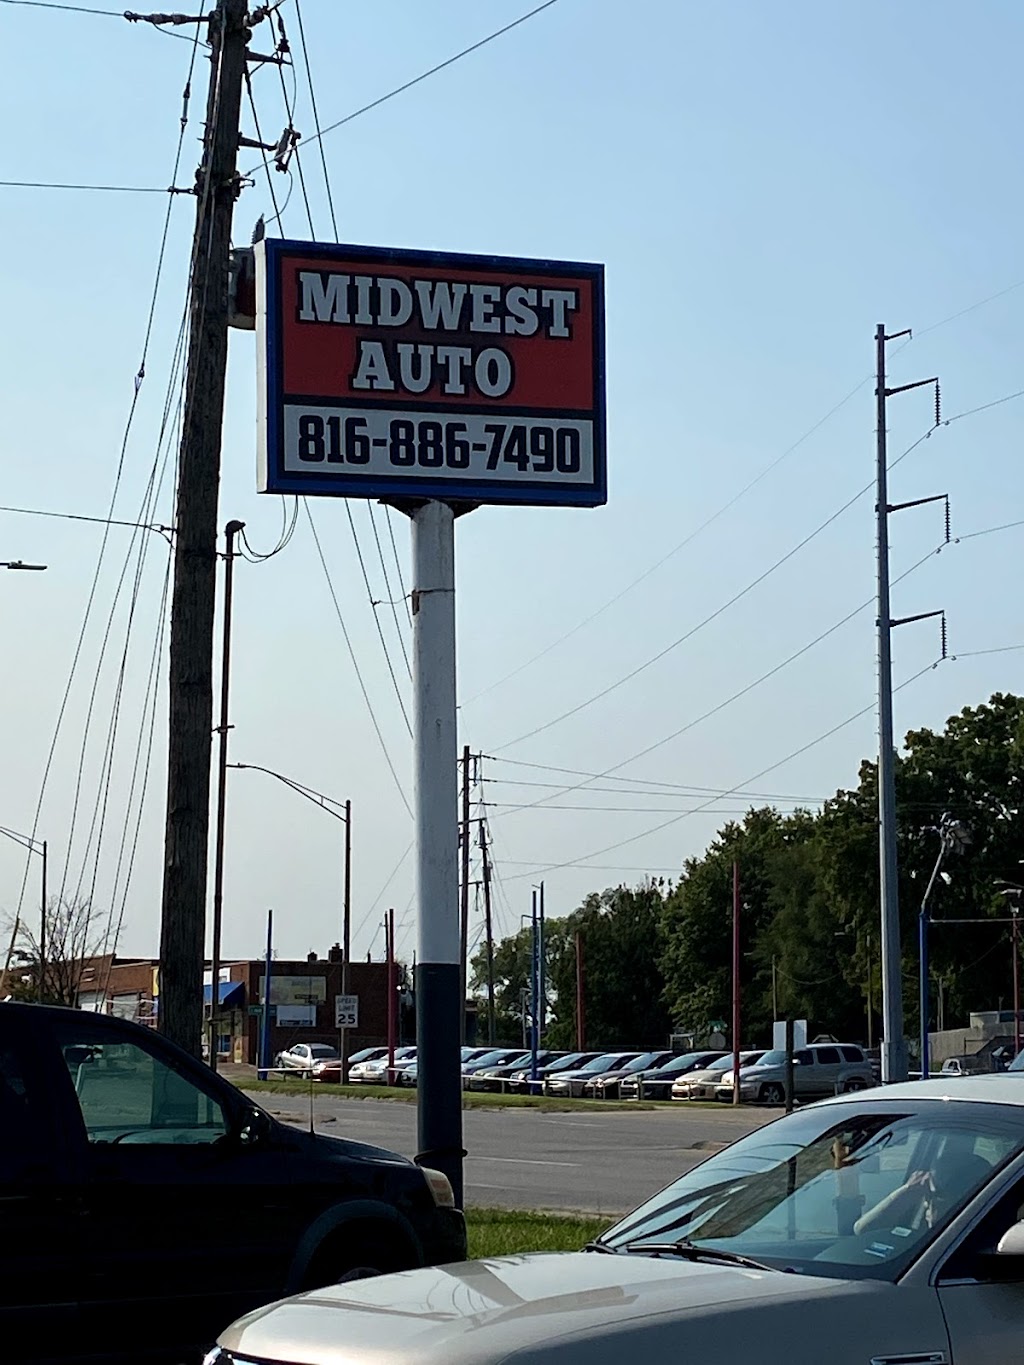 Midwest Auto Sales & Service | 10501 E US Hwy 24, Independence, MO 64053, USA | Phone: (816) 886-7490